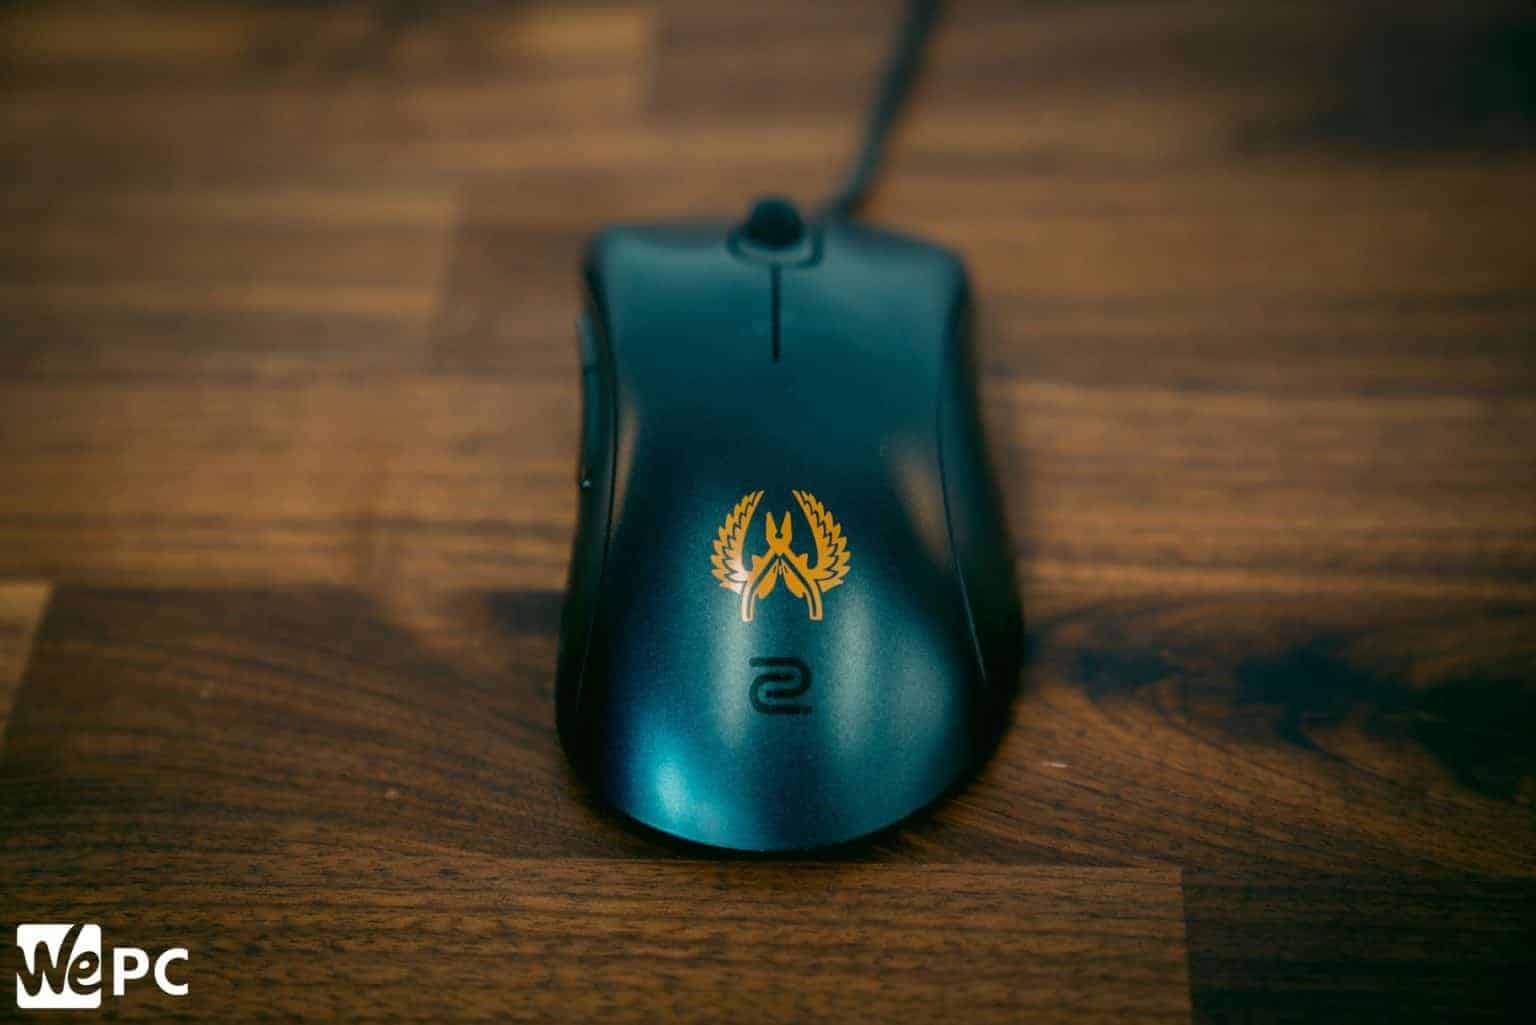 What Gaming Mouse Does Ropz Use?